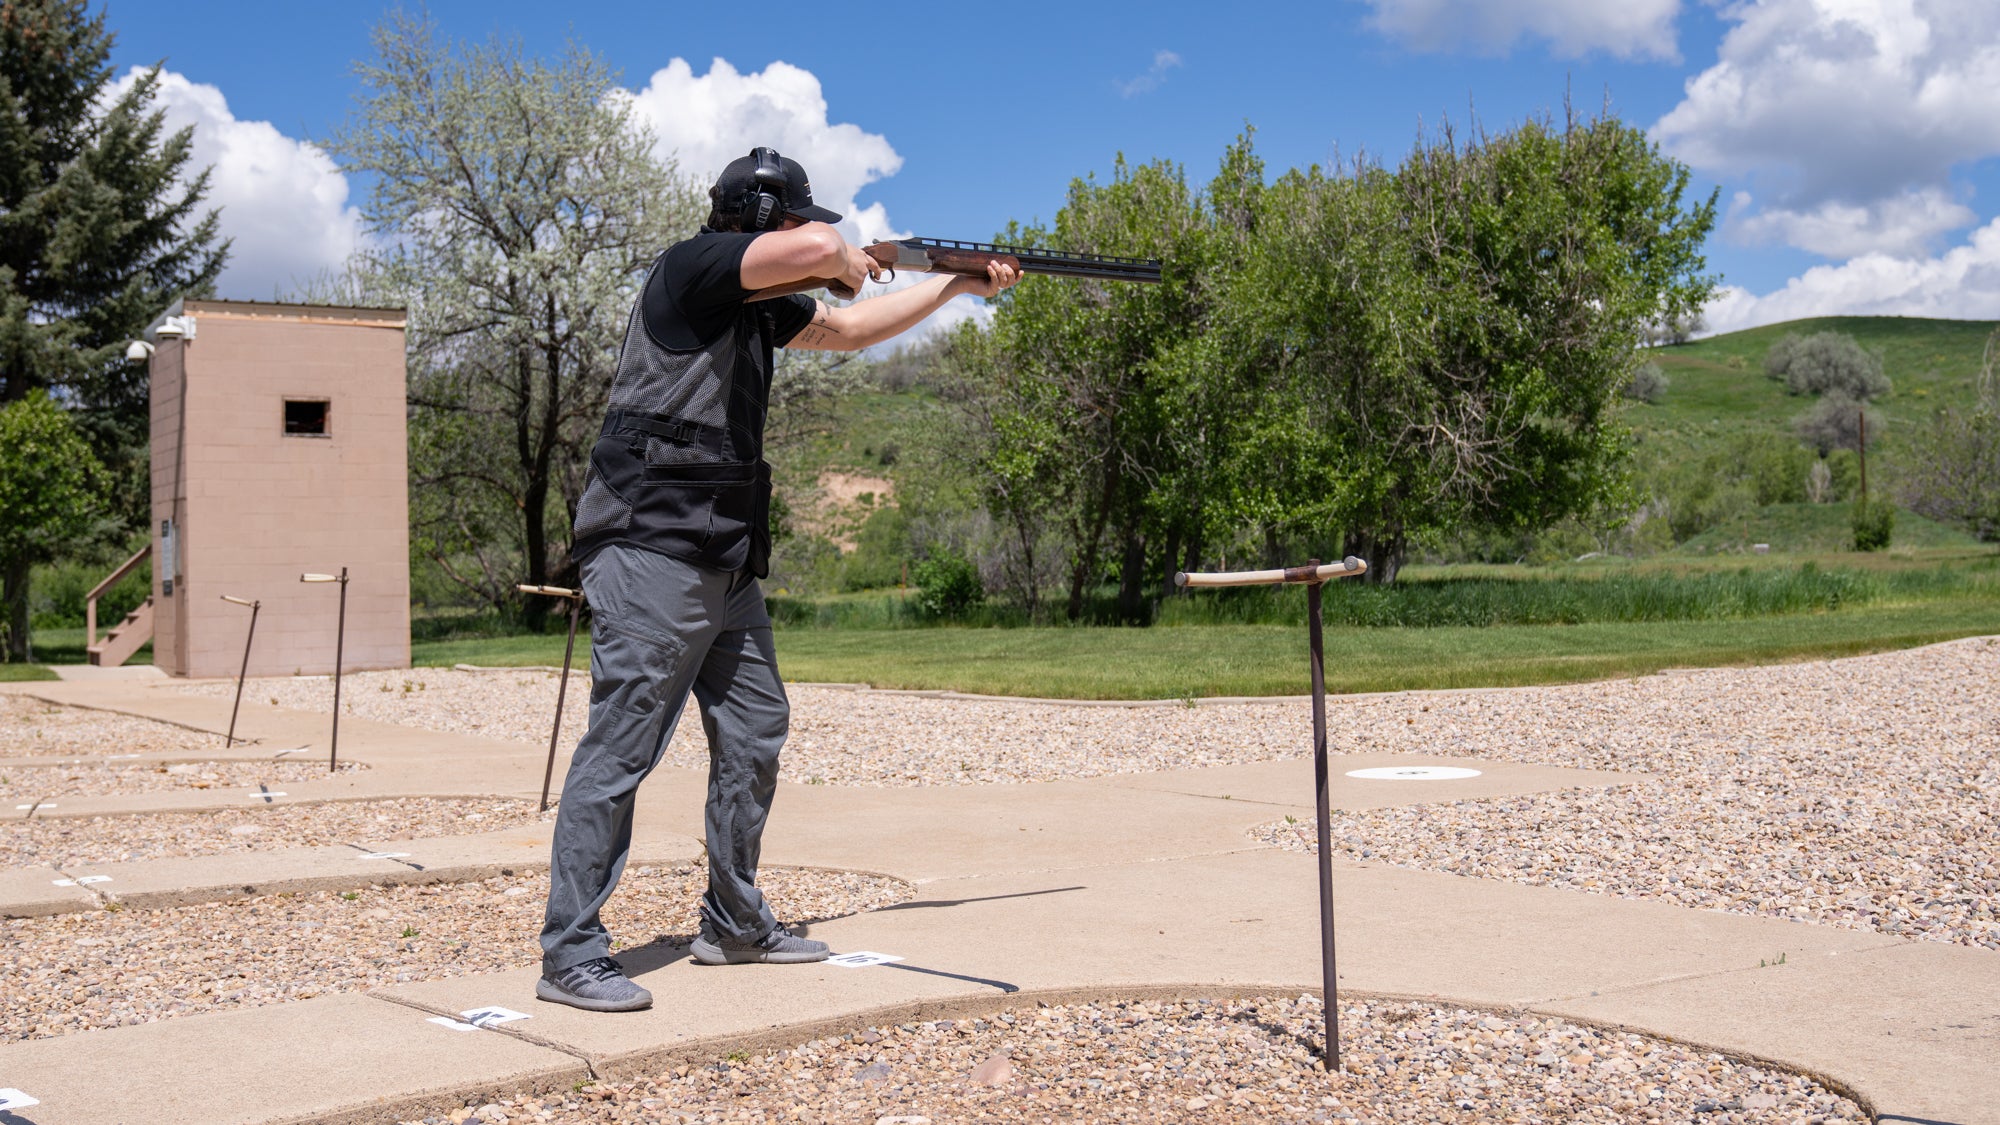 Trap shooting Stance